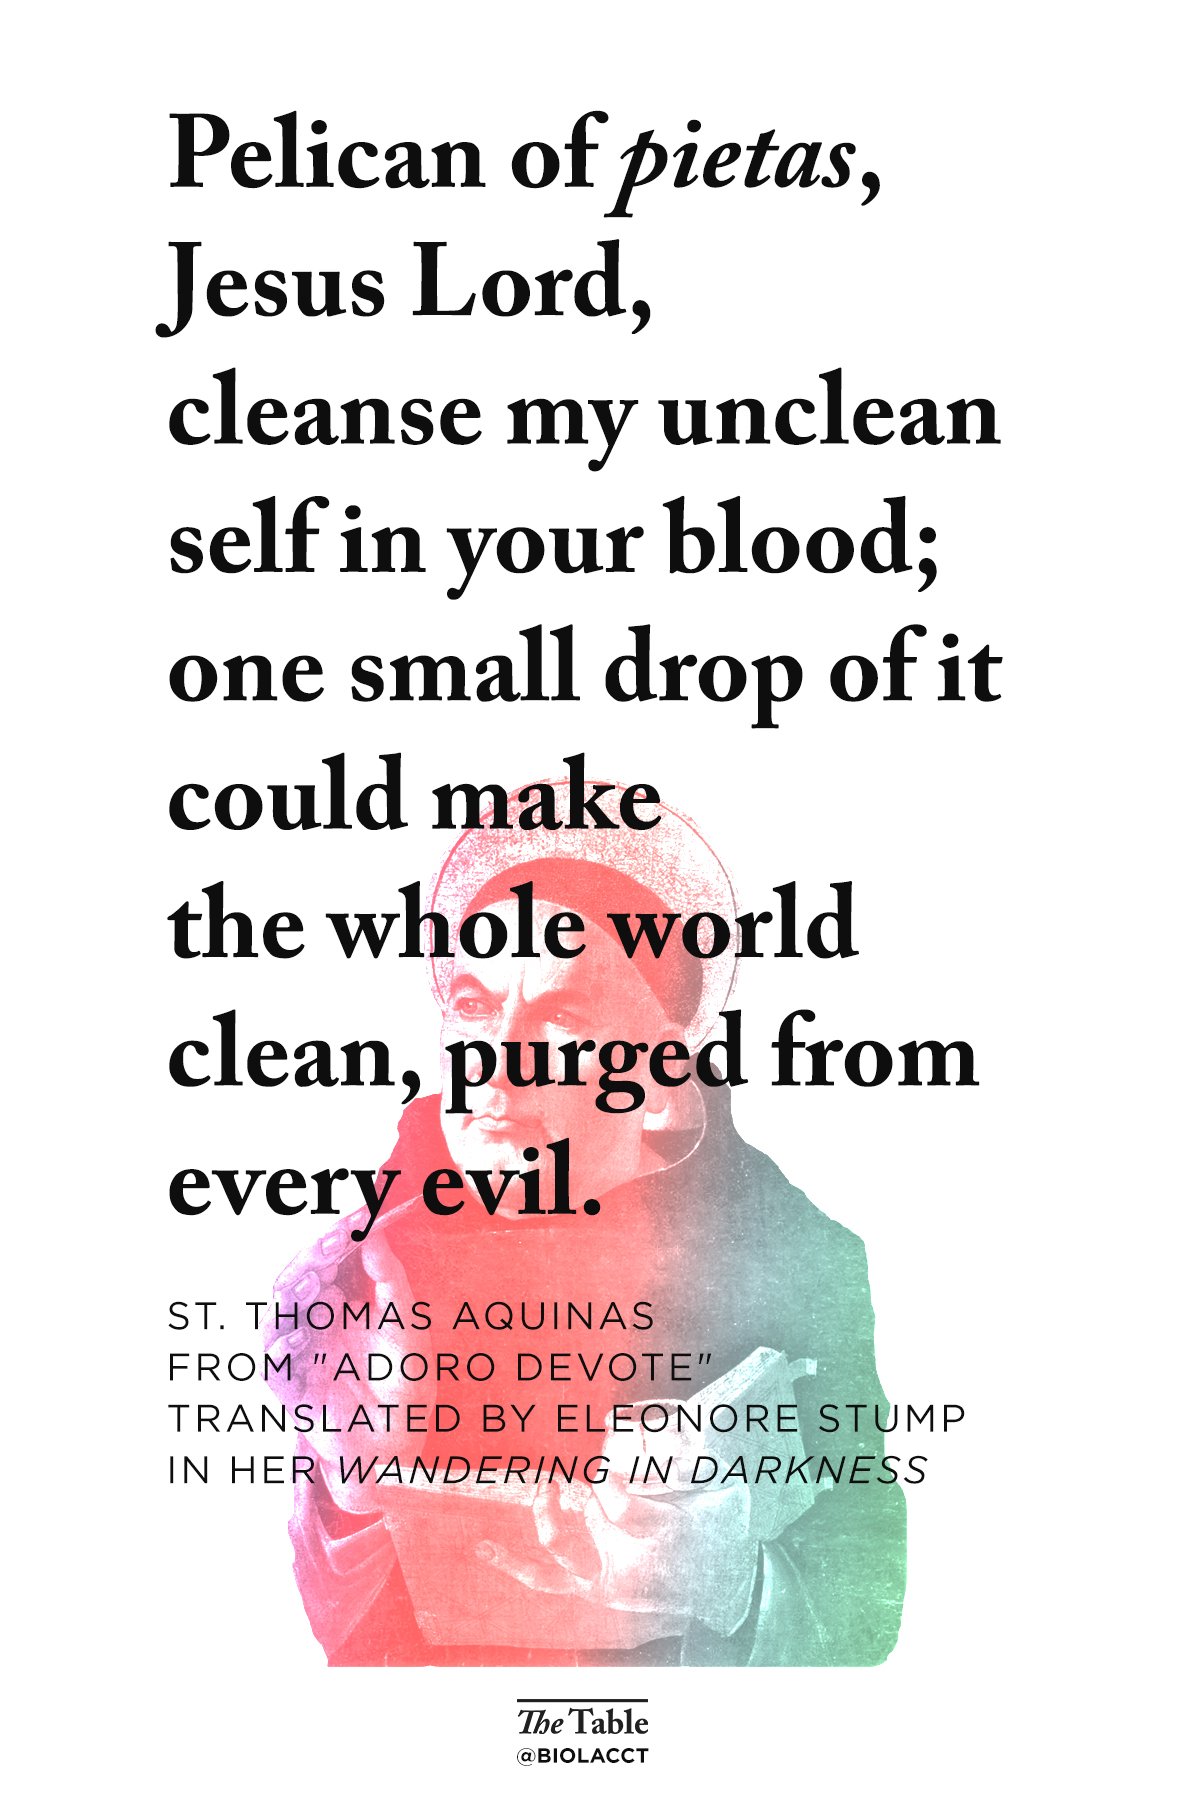 Quote: Pelican of pietas, Jesus Lord, cleanse my unclean self in your blood; one small drop of it could make the whole world clean, purged from every evil.